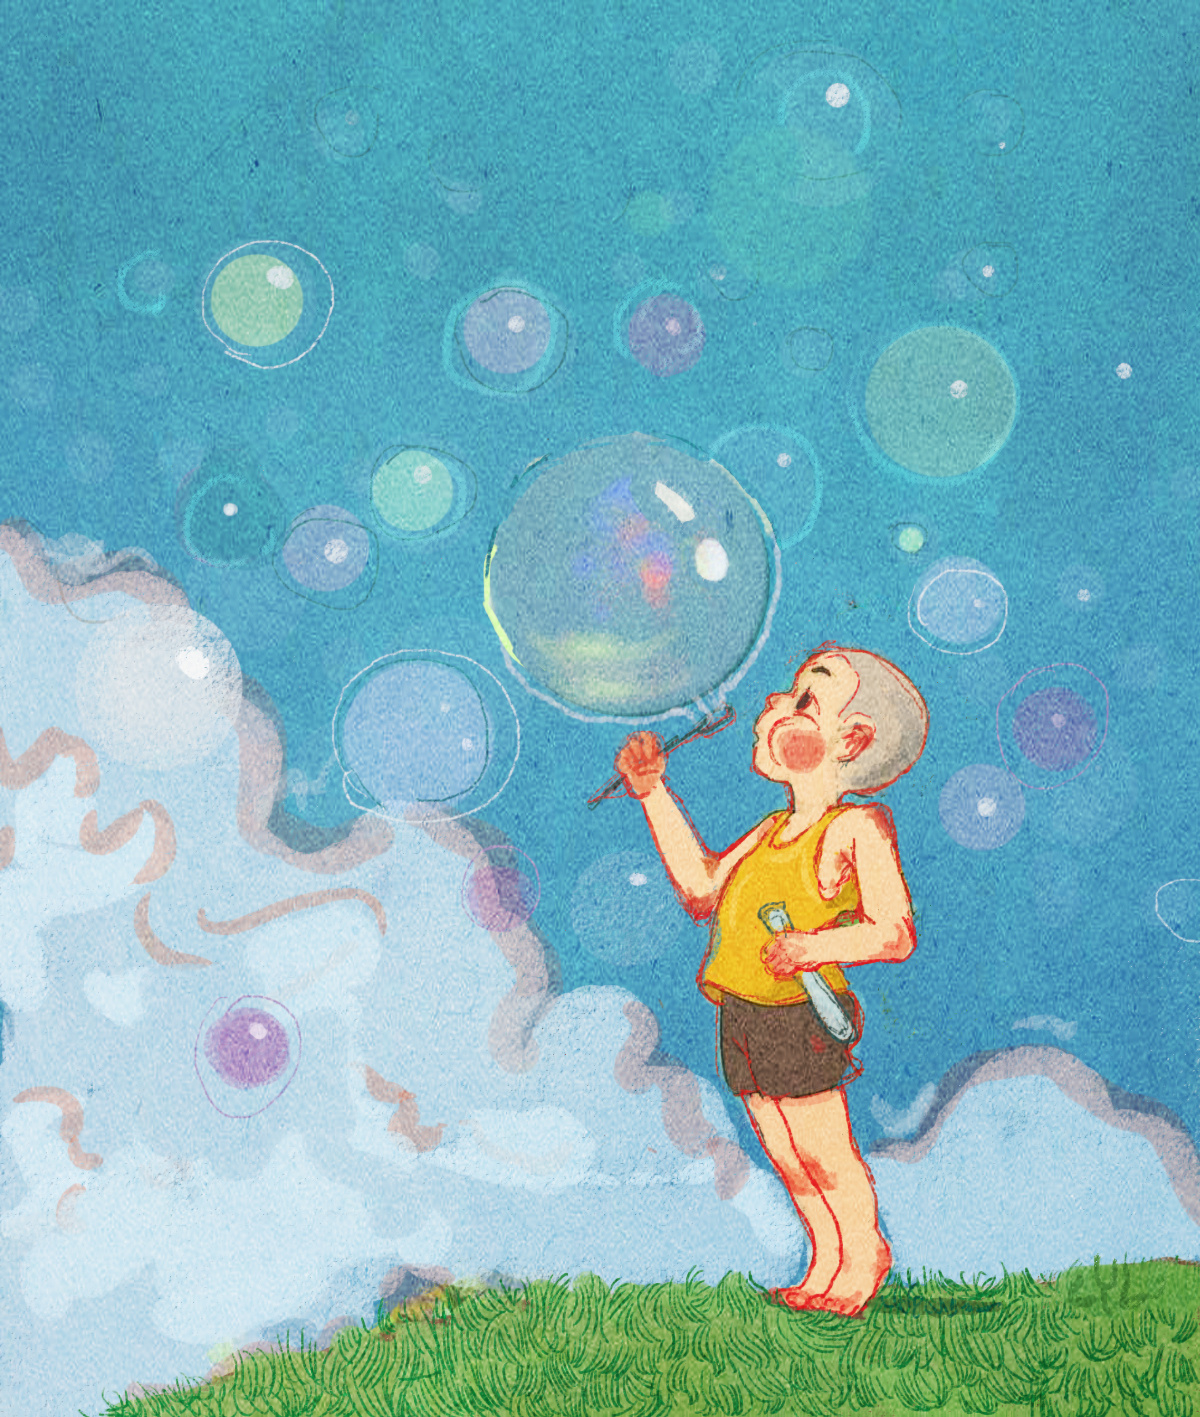 Blow Bubble PNG Image, Childrens Day Child Blowing Bubbles Illustration ...